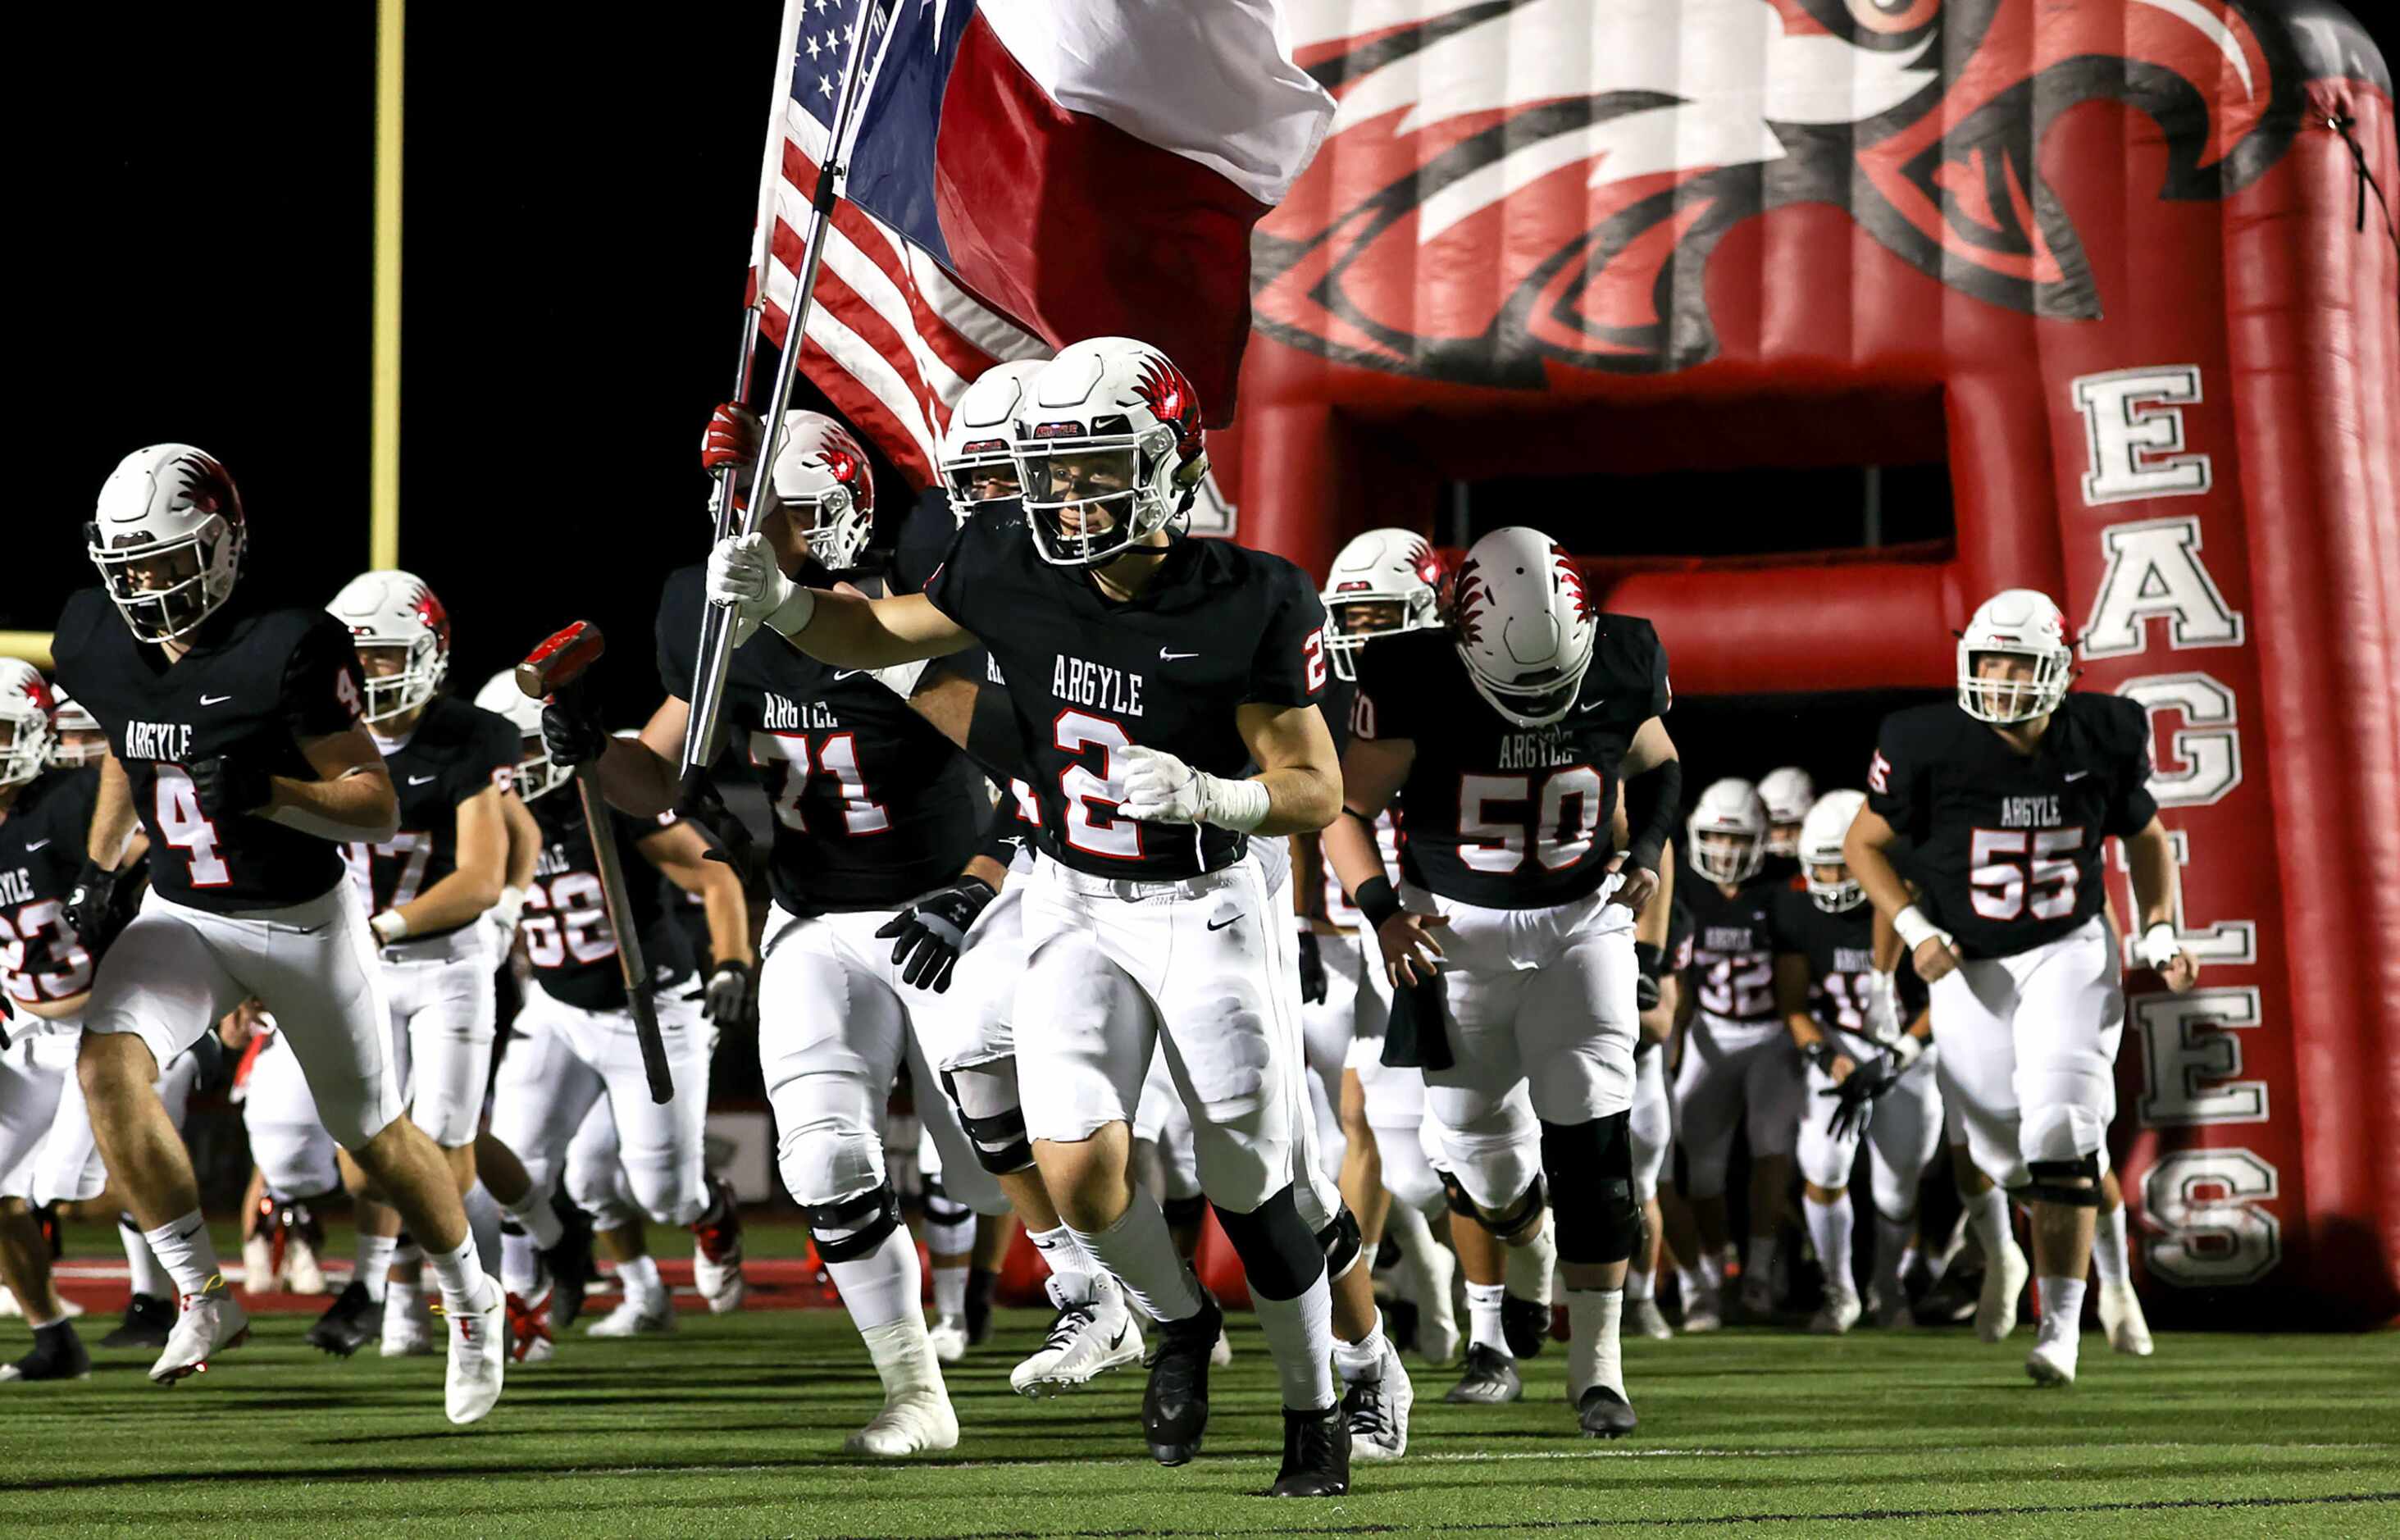 The Argyle Eagles enter the field to face Terrell in a District 7-4A high school football...